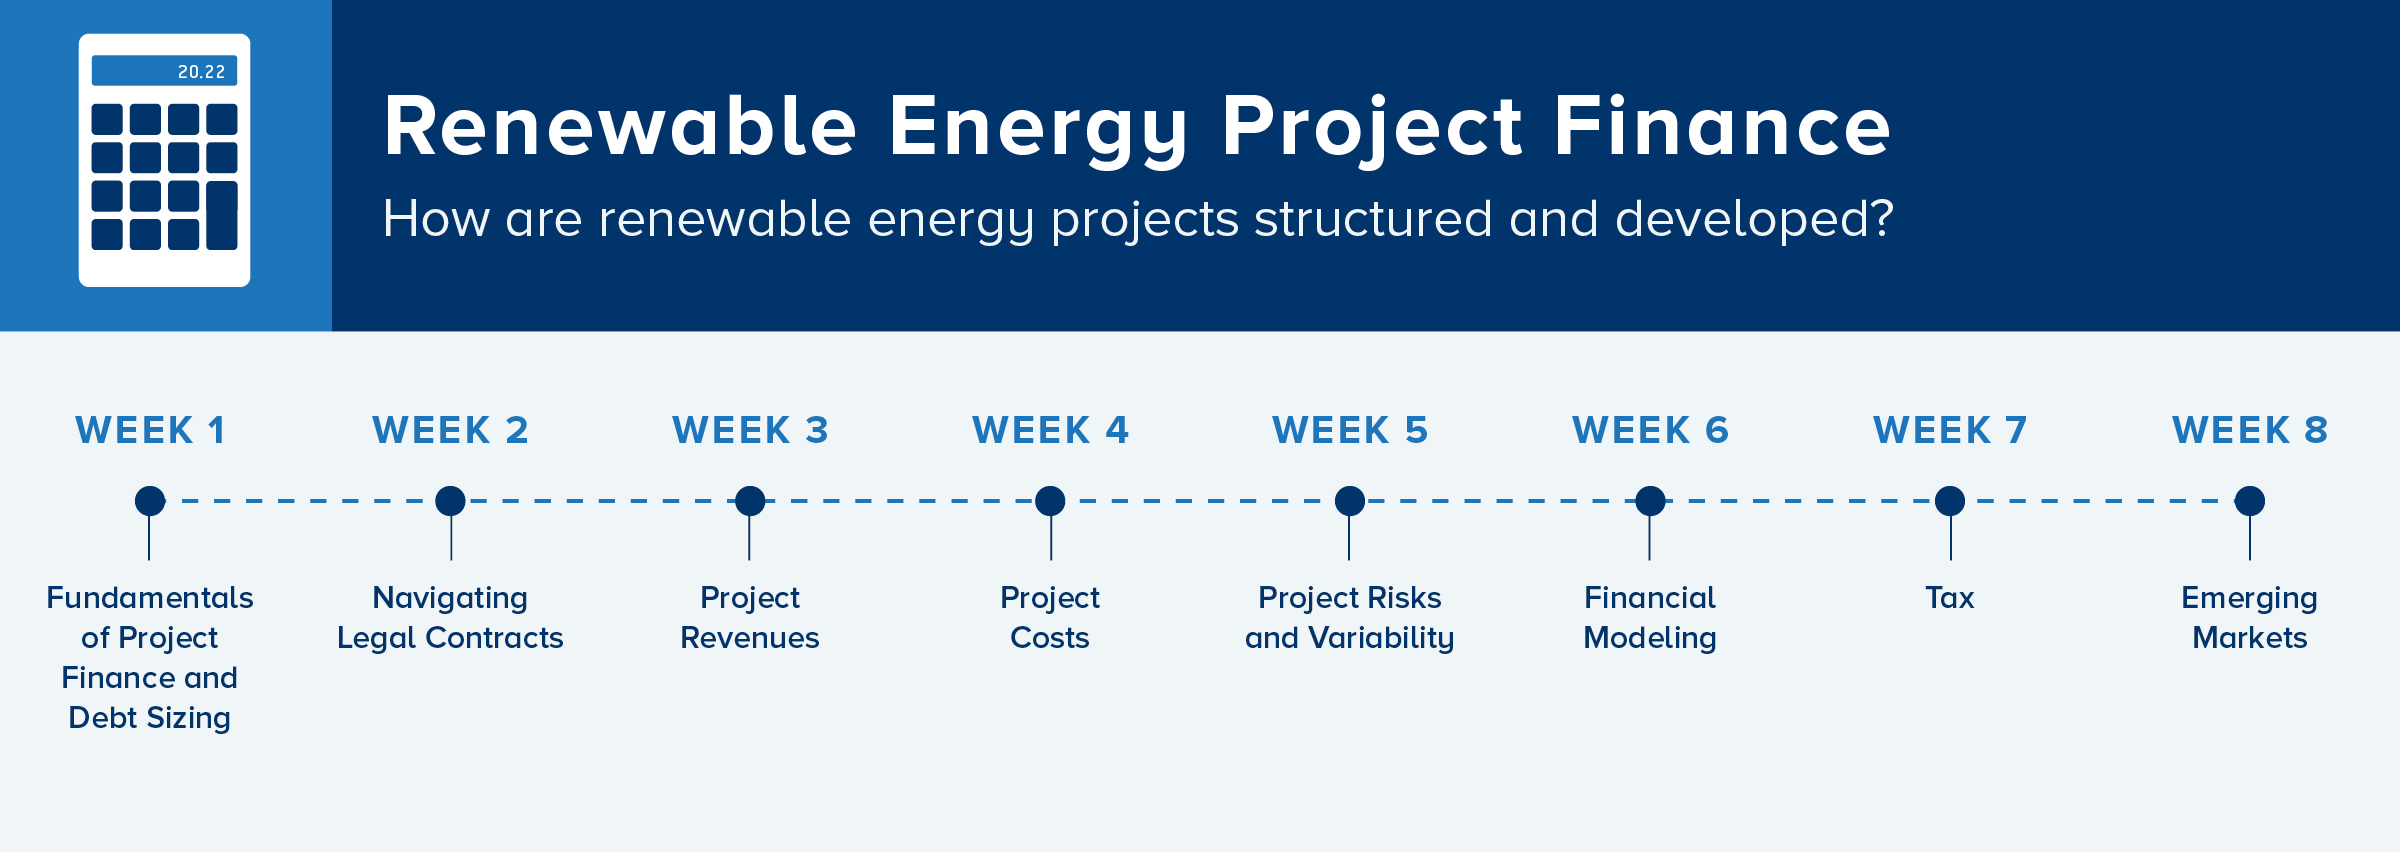 Renewable Energy Project Finance Course Timing